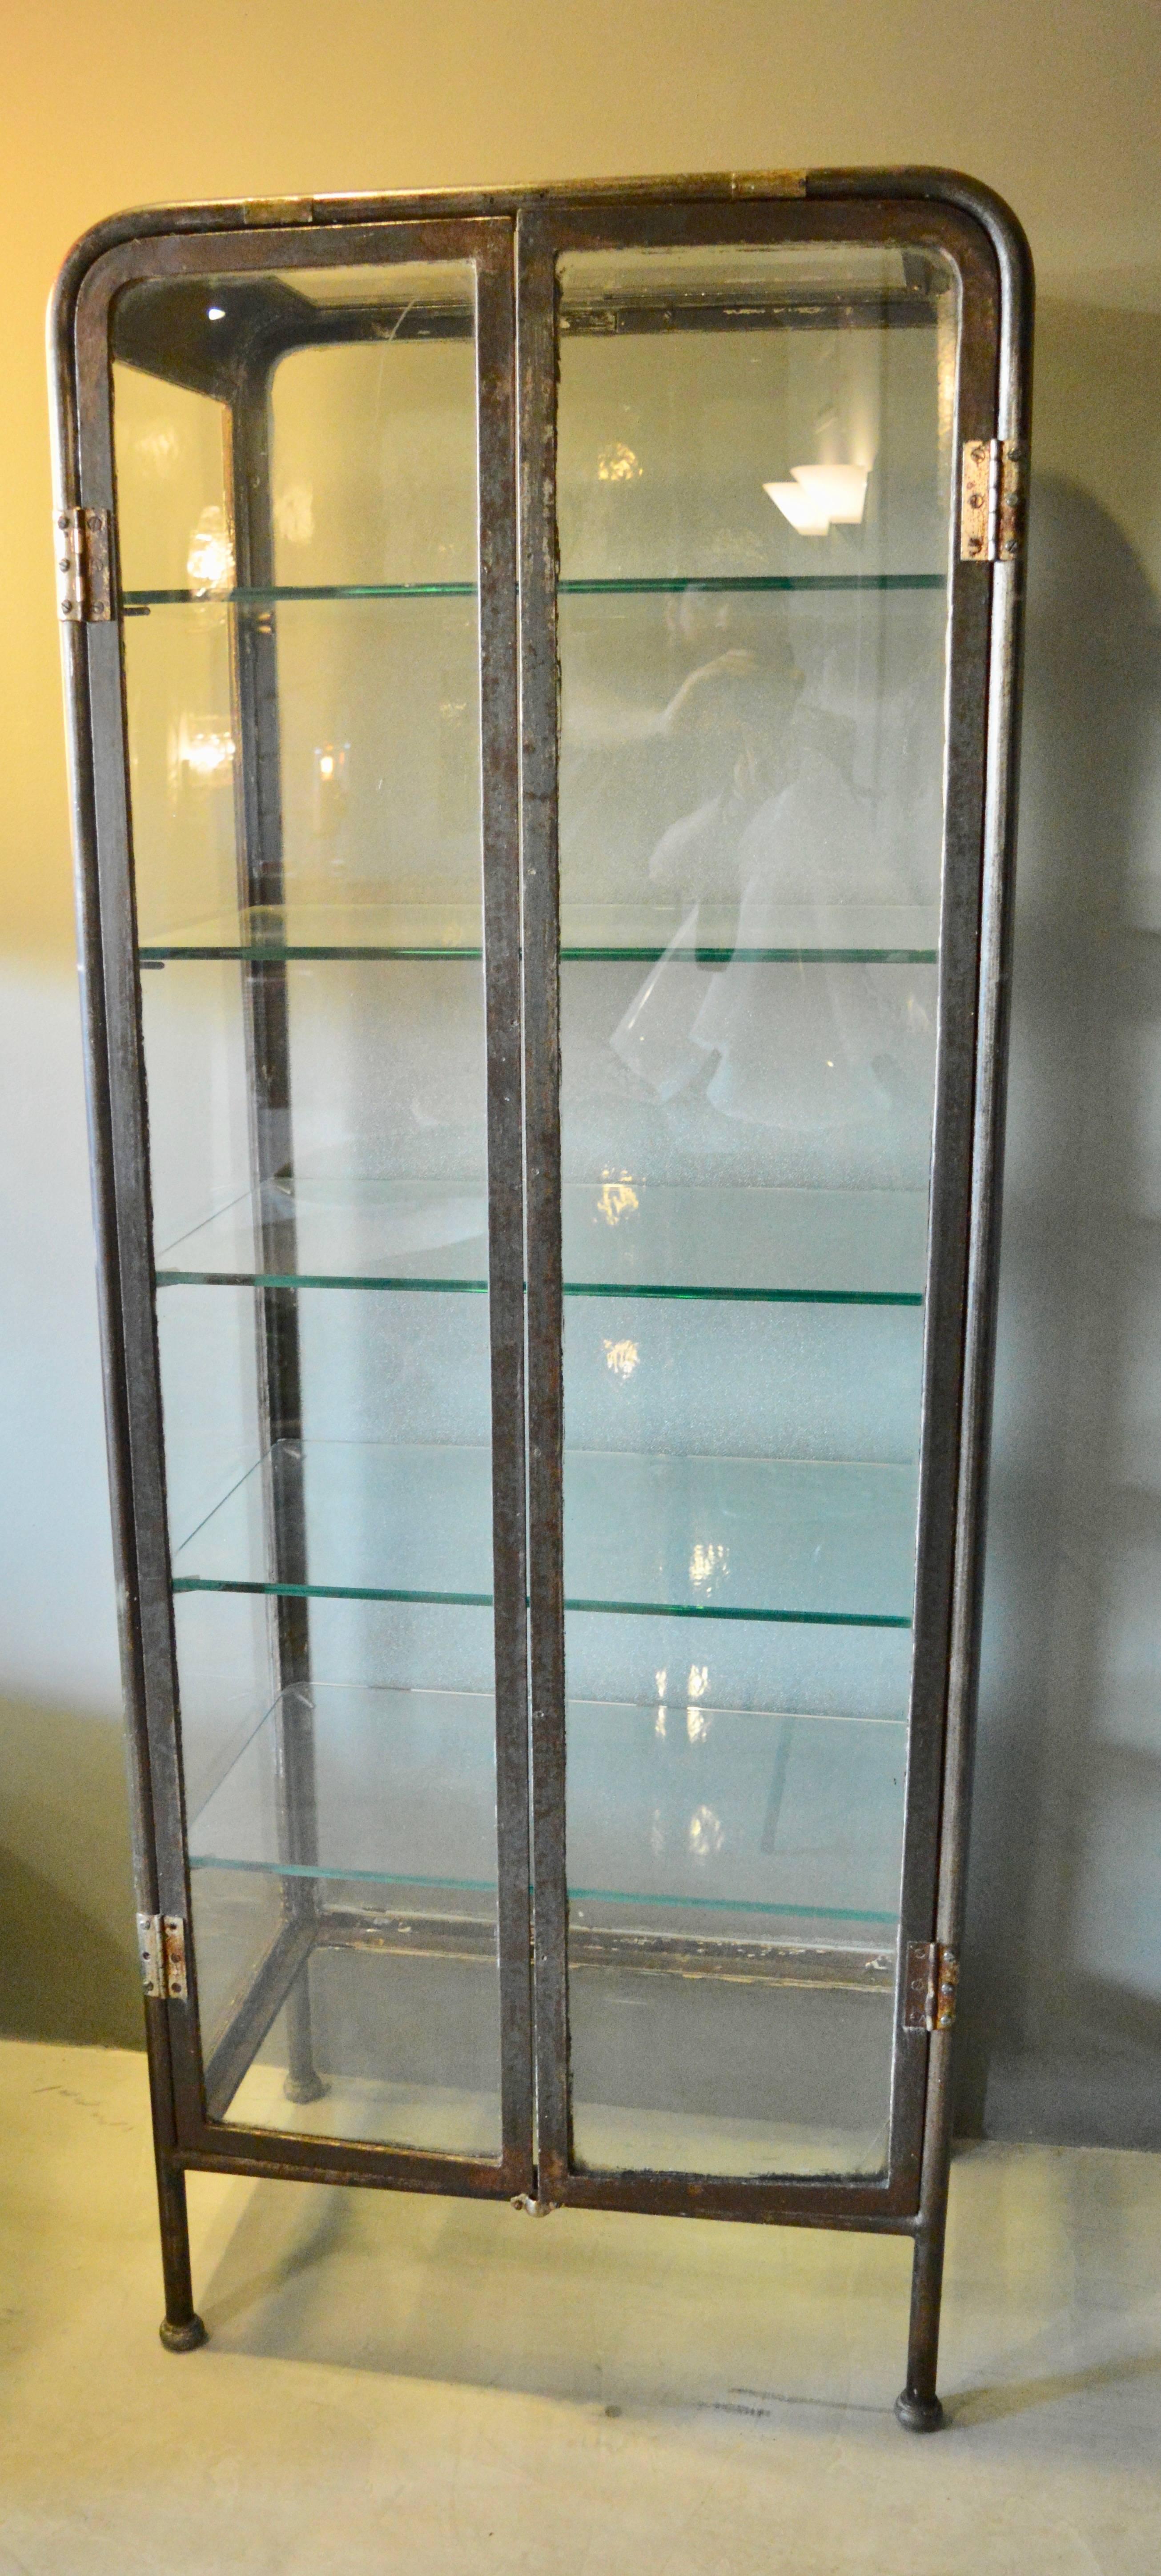 Handsome two-door iron and glass vitrine from Buenos Aires, circa 1930. Great patina to metal and in excellent vintage condition. Great display piece. Six other vitrines available in separate listings.